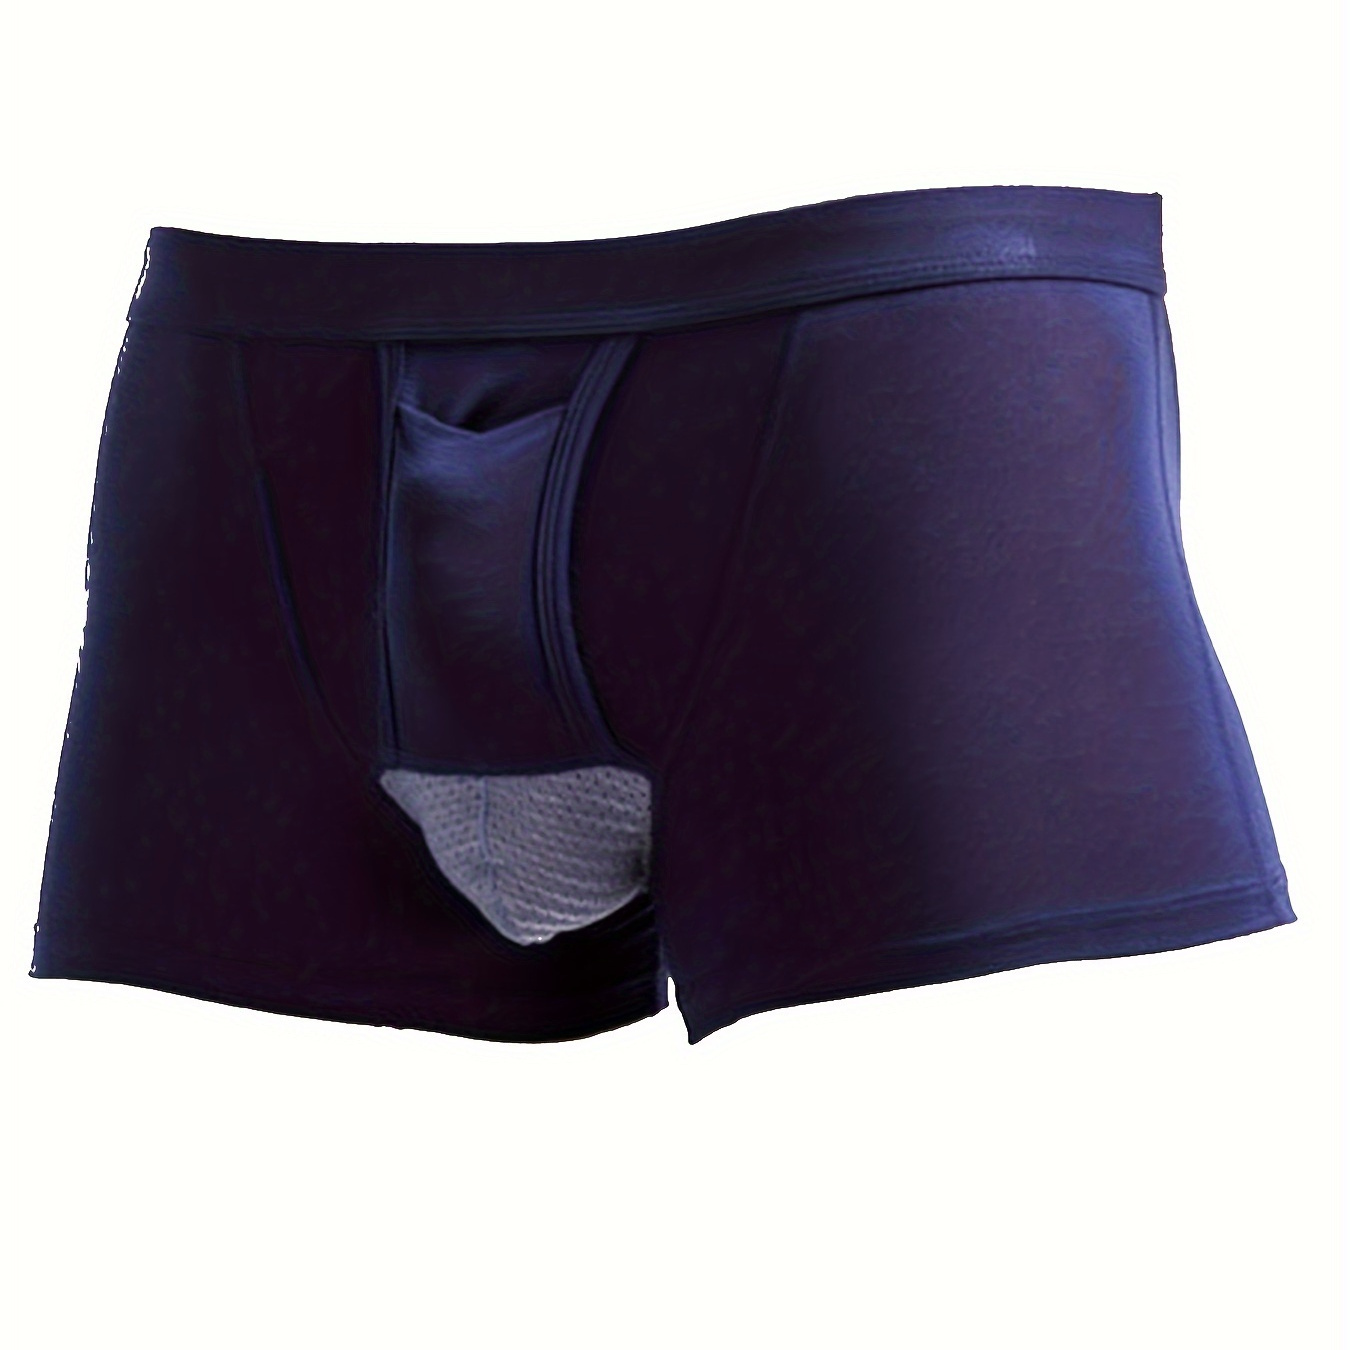 

Men's Modal Underwear, Separate Mesh Support Bag U Convex Breathable And Sexy Boxer Briefs Shorts, Men's Underpants